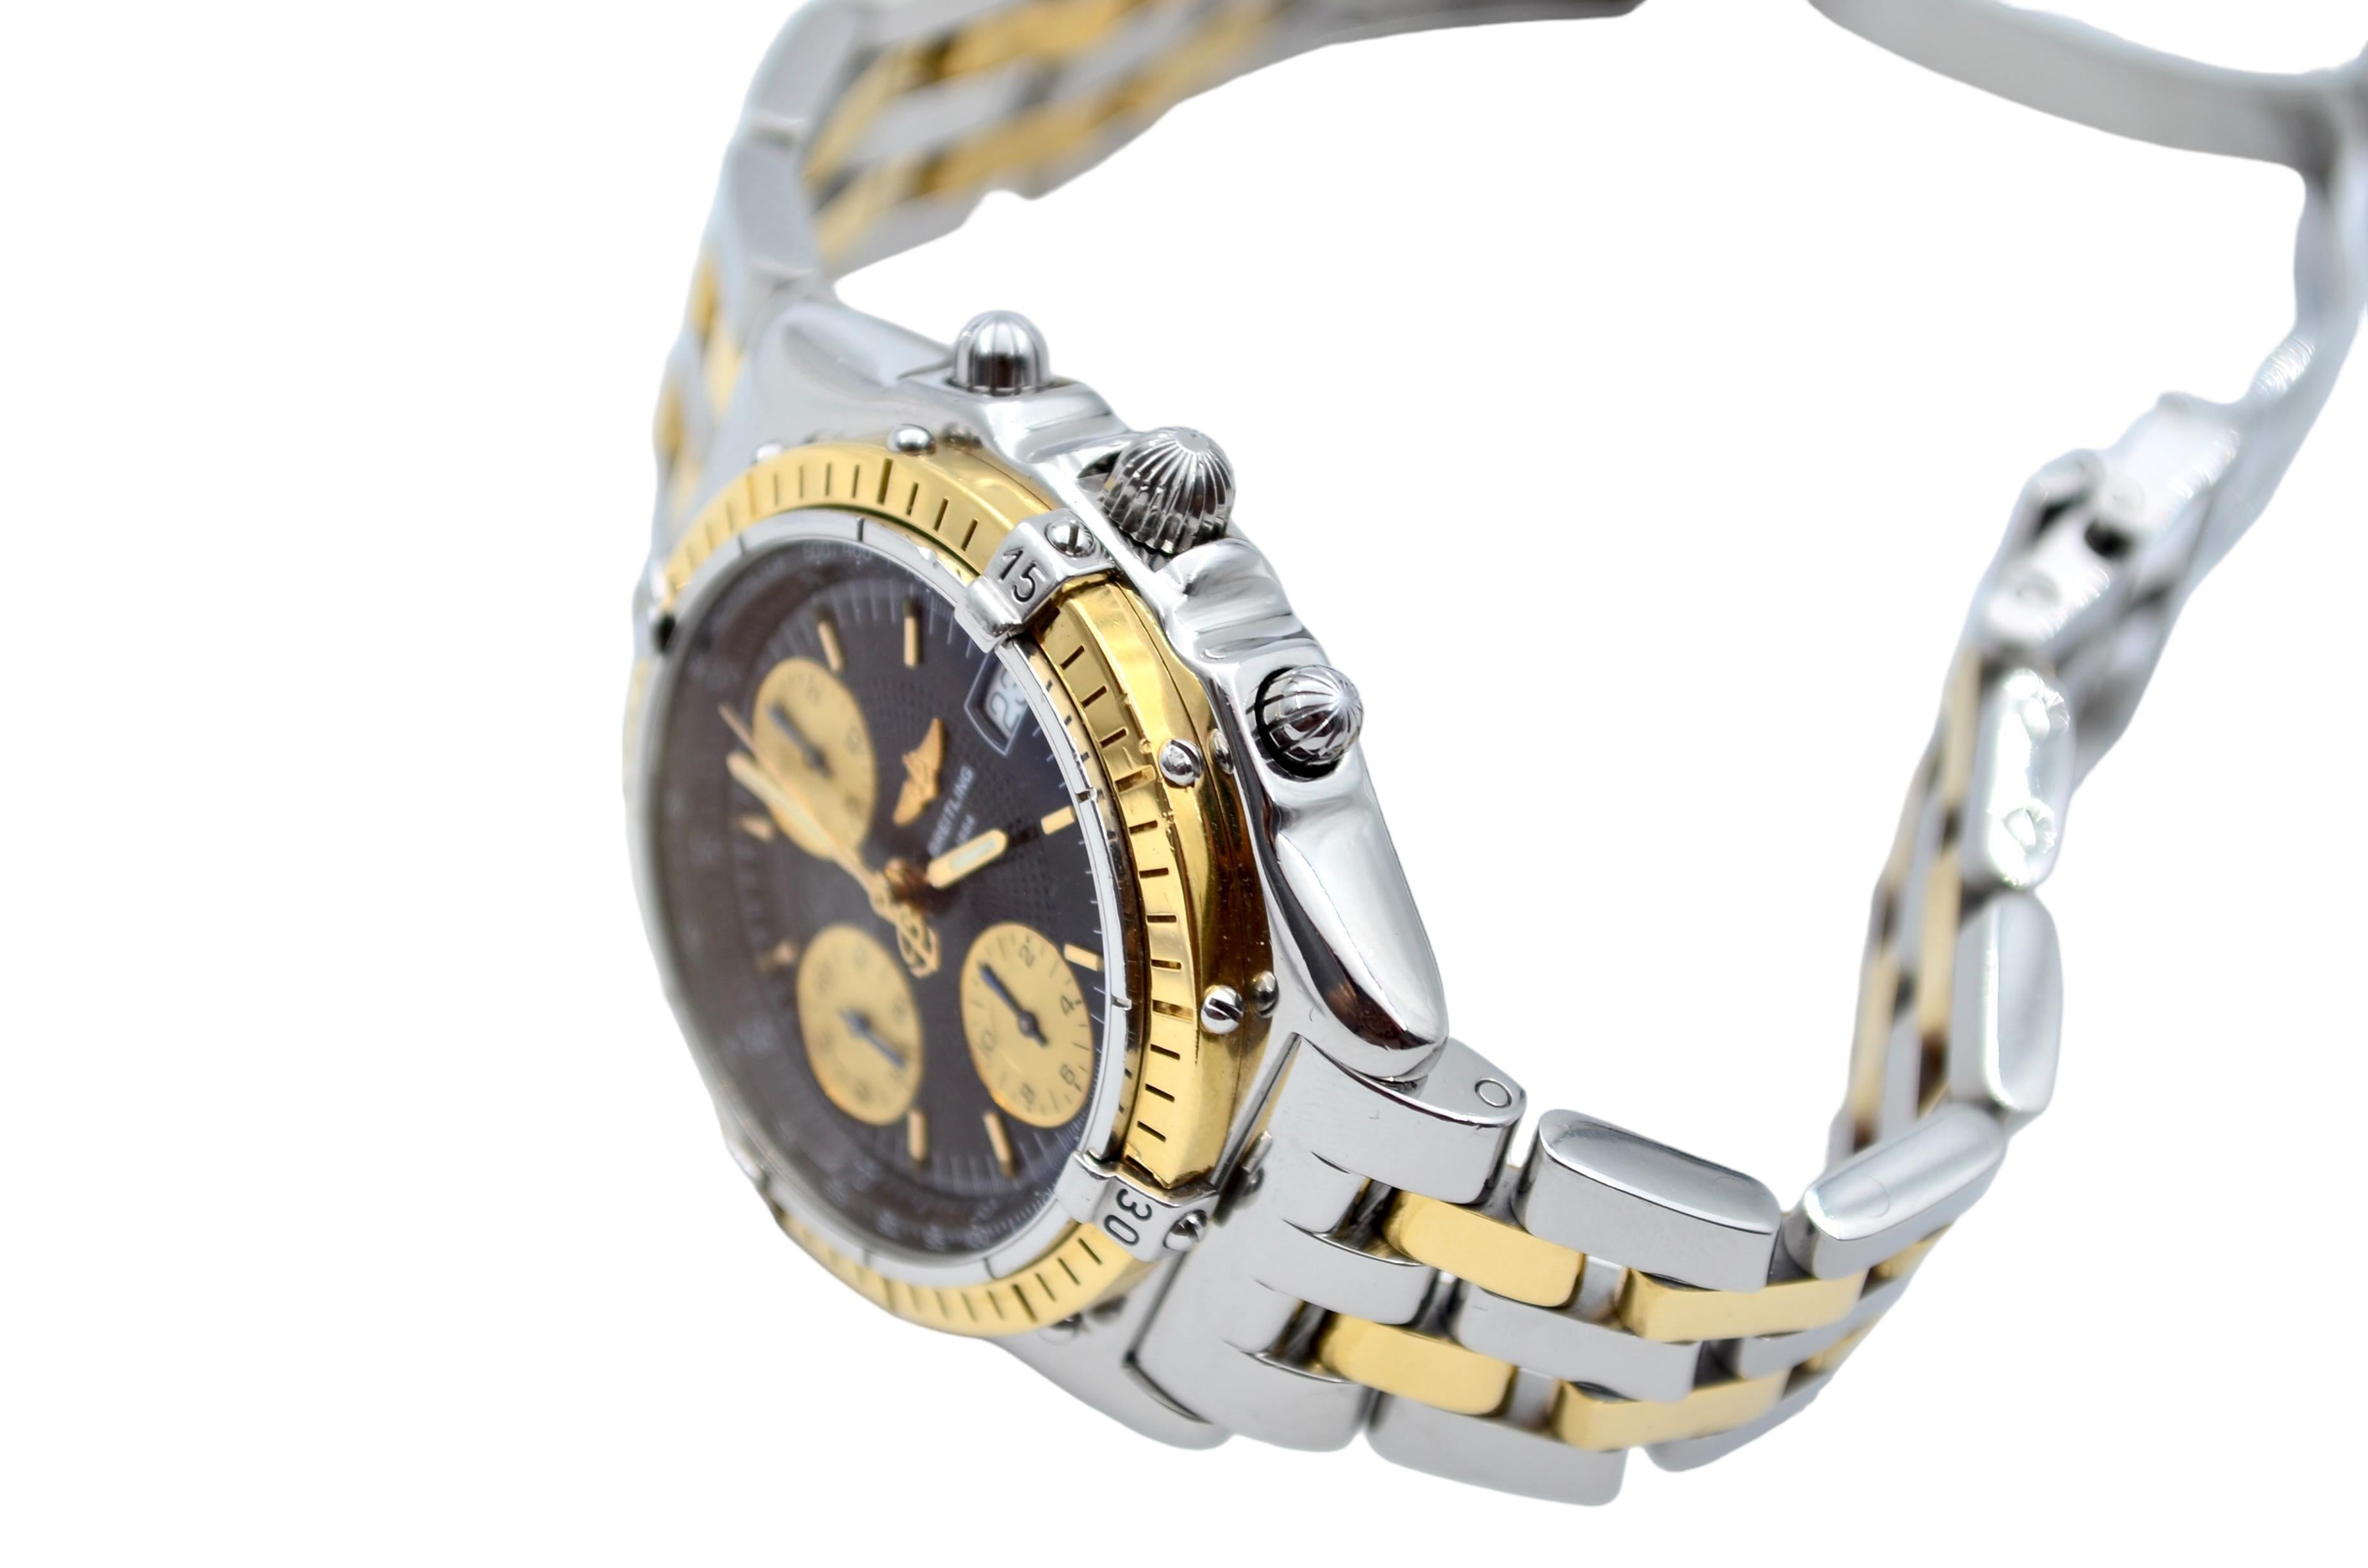 Breitling Chronomat Chronograph 39mm Gold&Steel Automatic Ref: D13050.1 1